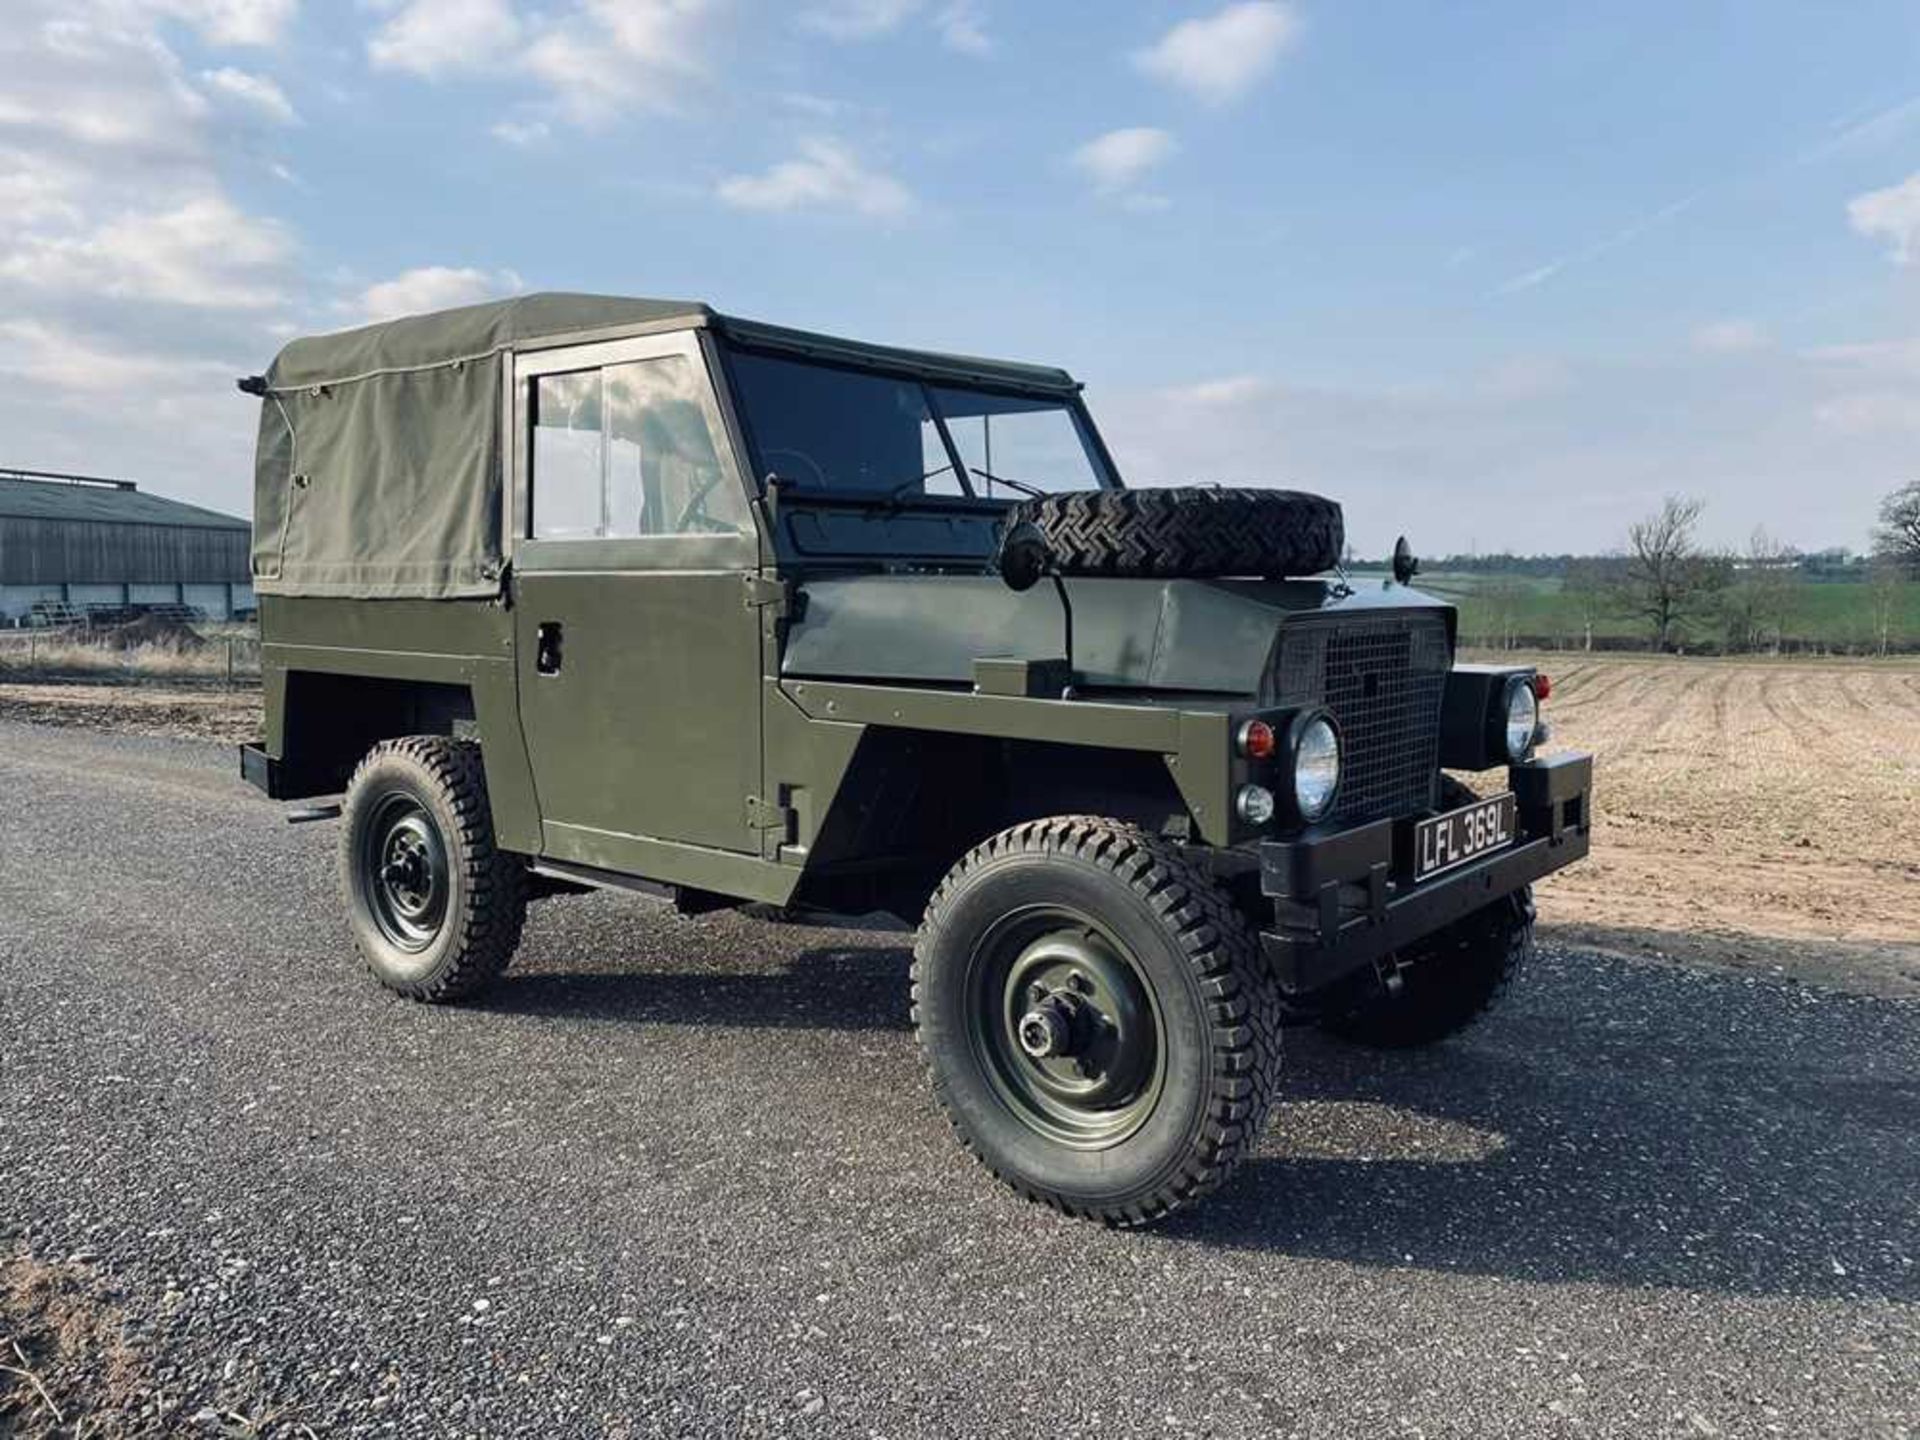 1972 Land Rover 88 Lightweight Extensive restoration recently completed - Image 4 of 22